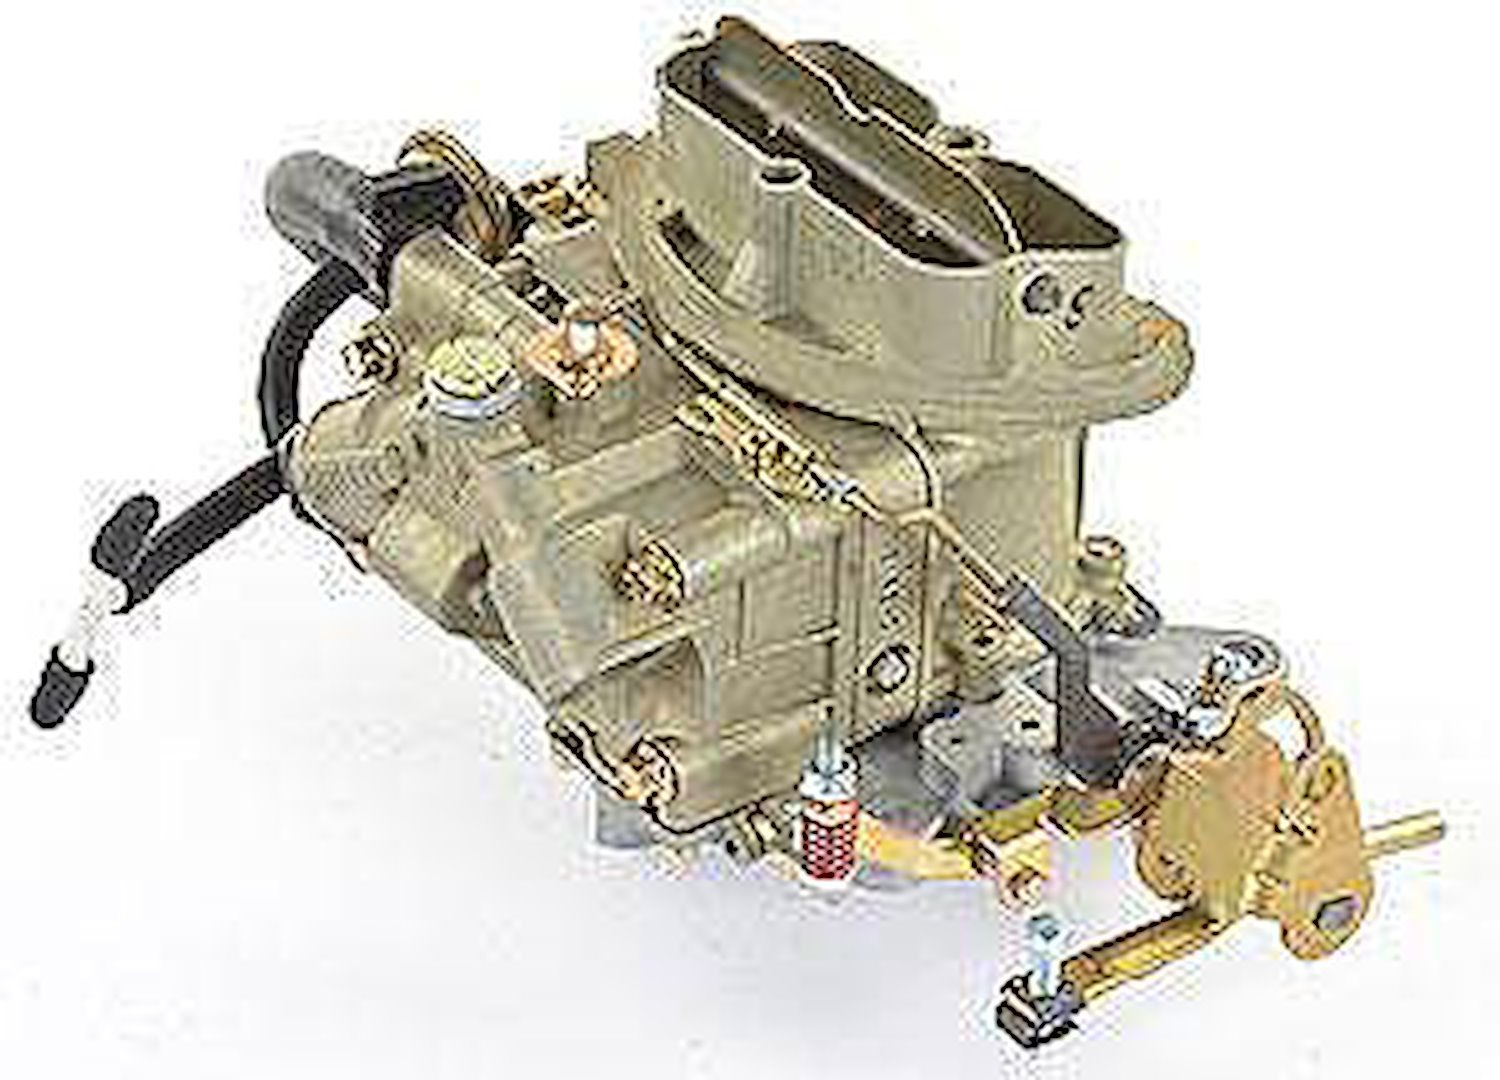 Chrysler OE Muscle Car Carb For 1970-71 340 3x2 (Center Carb)